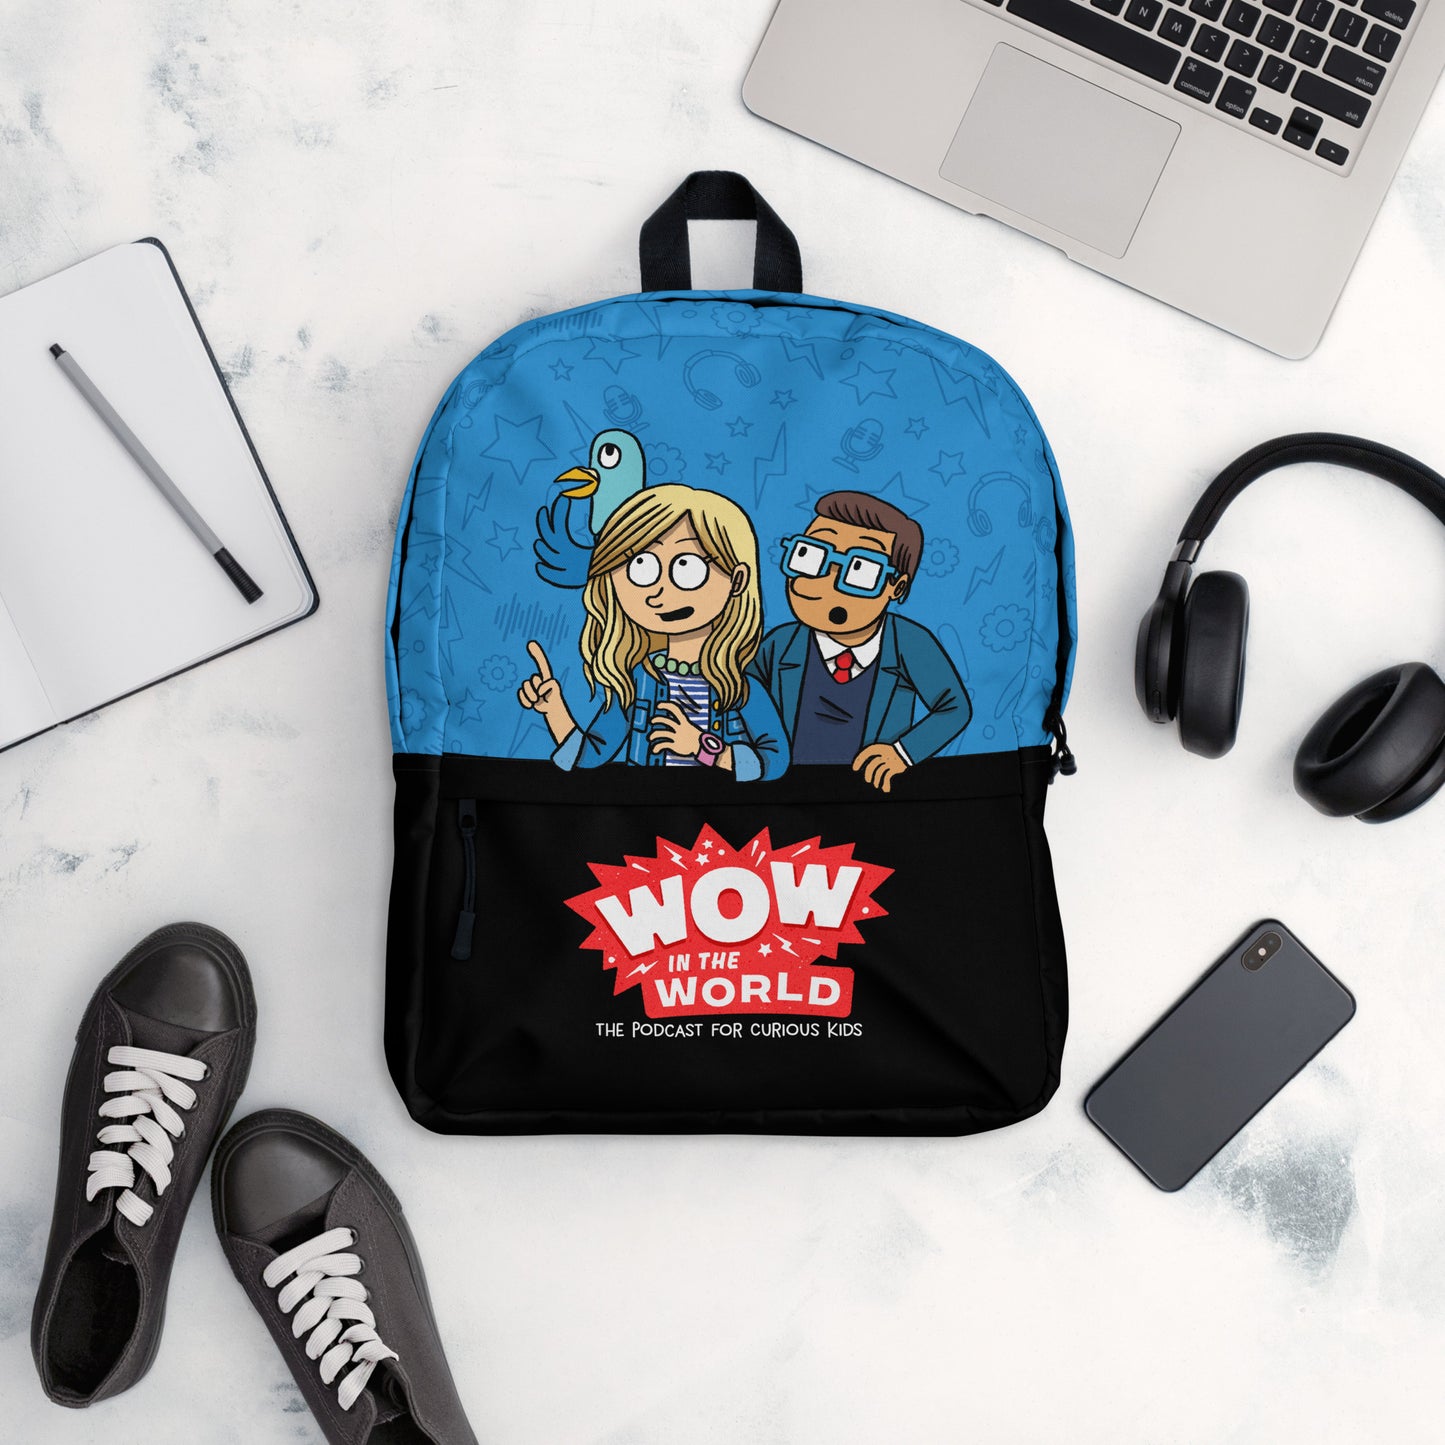 Wow in the World Characters Premium Backpack